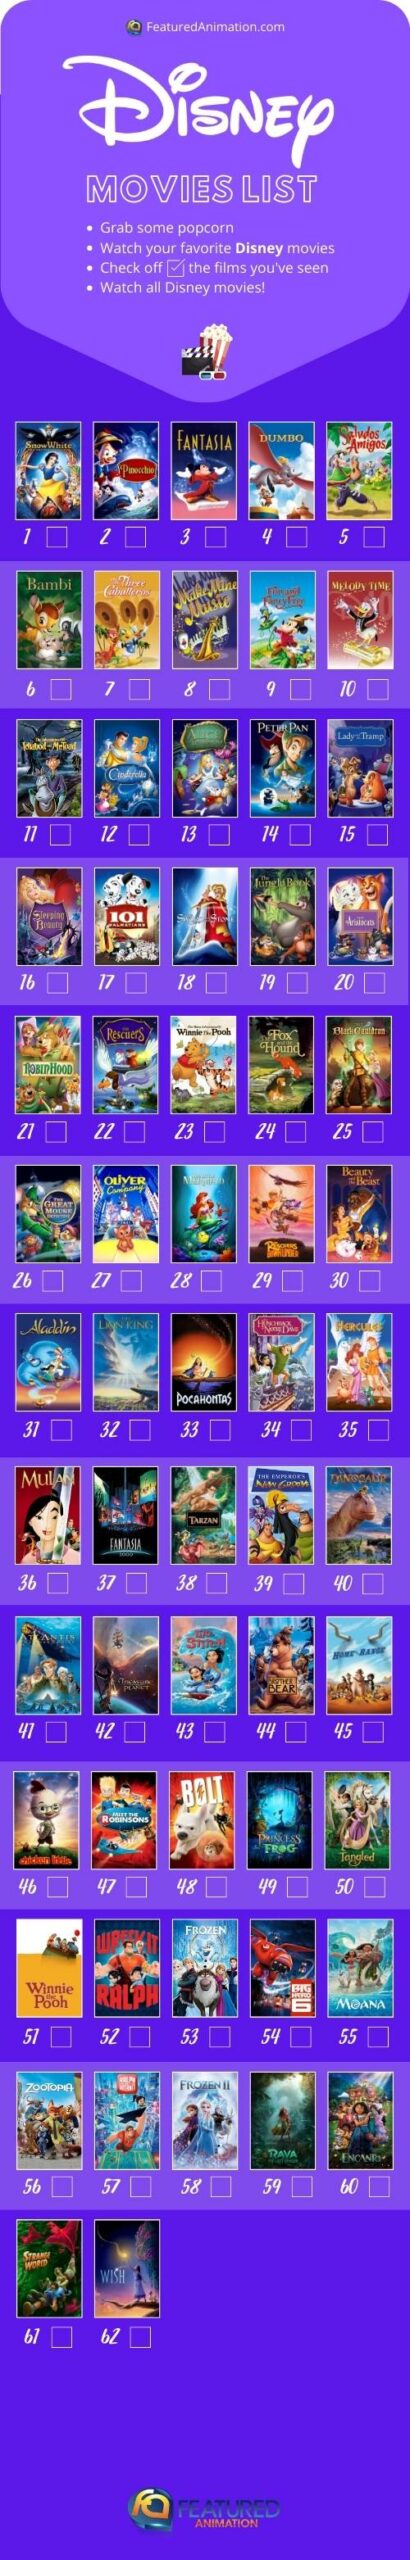 Disney movies checklist by Featured Animation